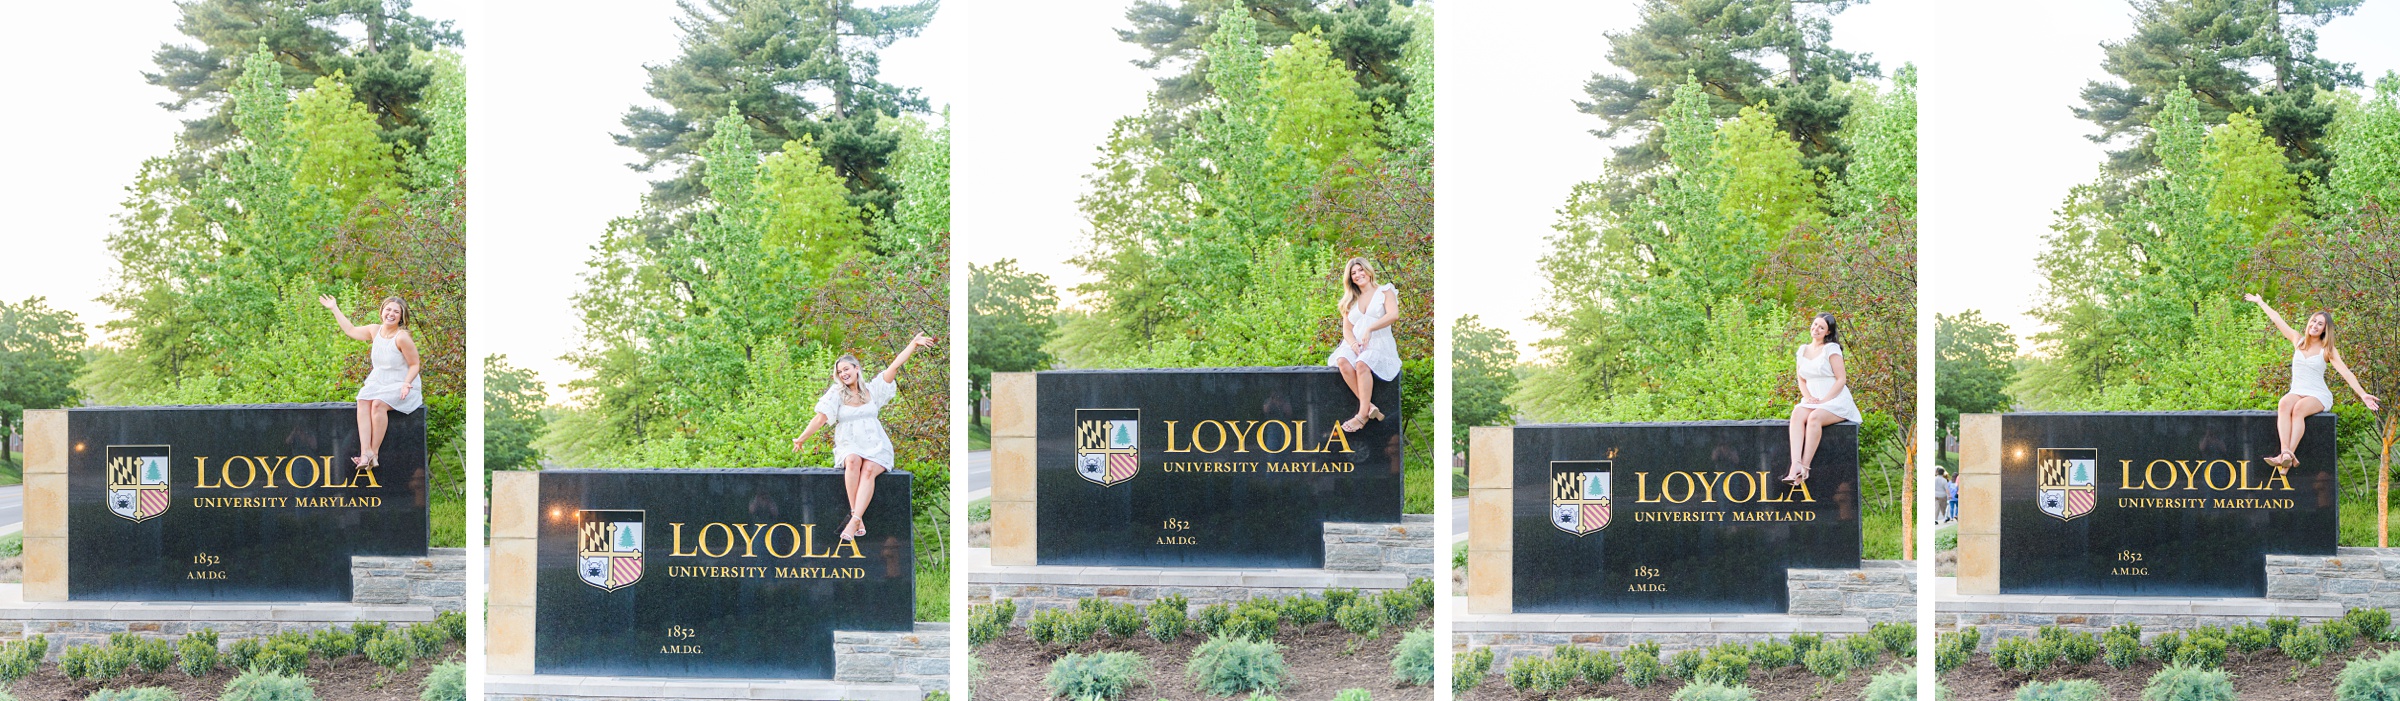 Loyola seniors pose on Loyola University Maryland's campus in graduation attire during Baltimore Grad Session photographed by Cait Kramer